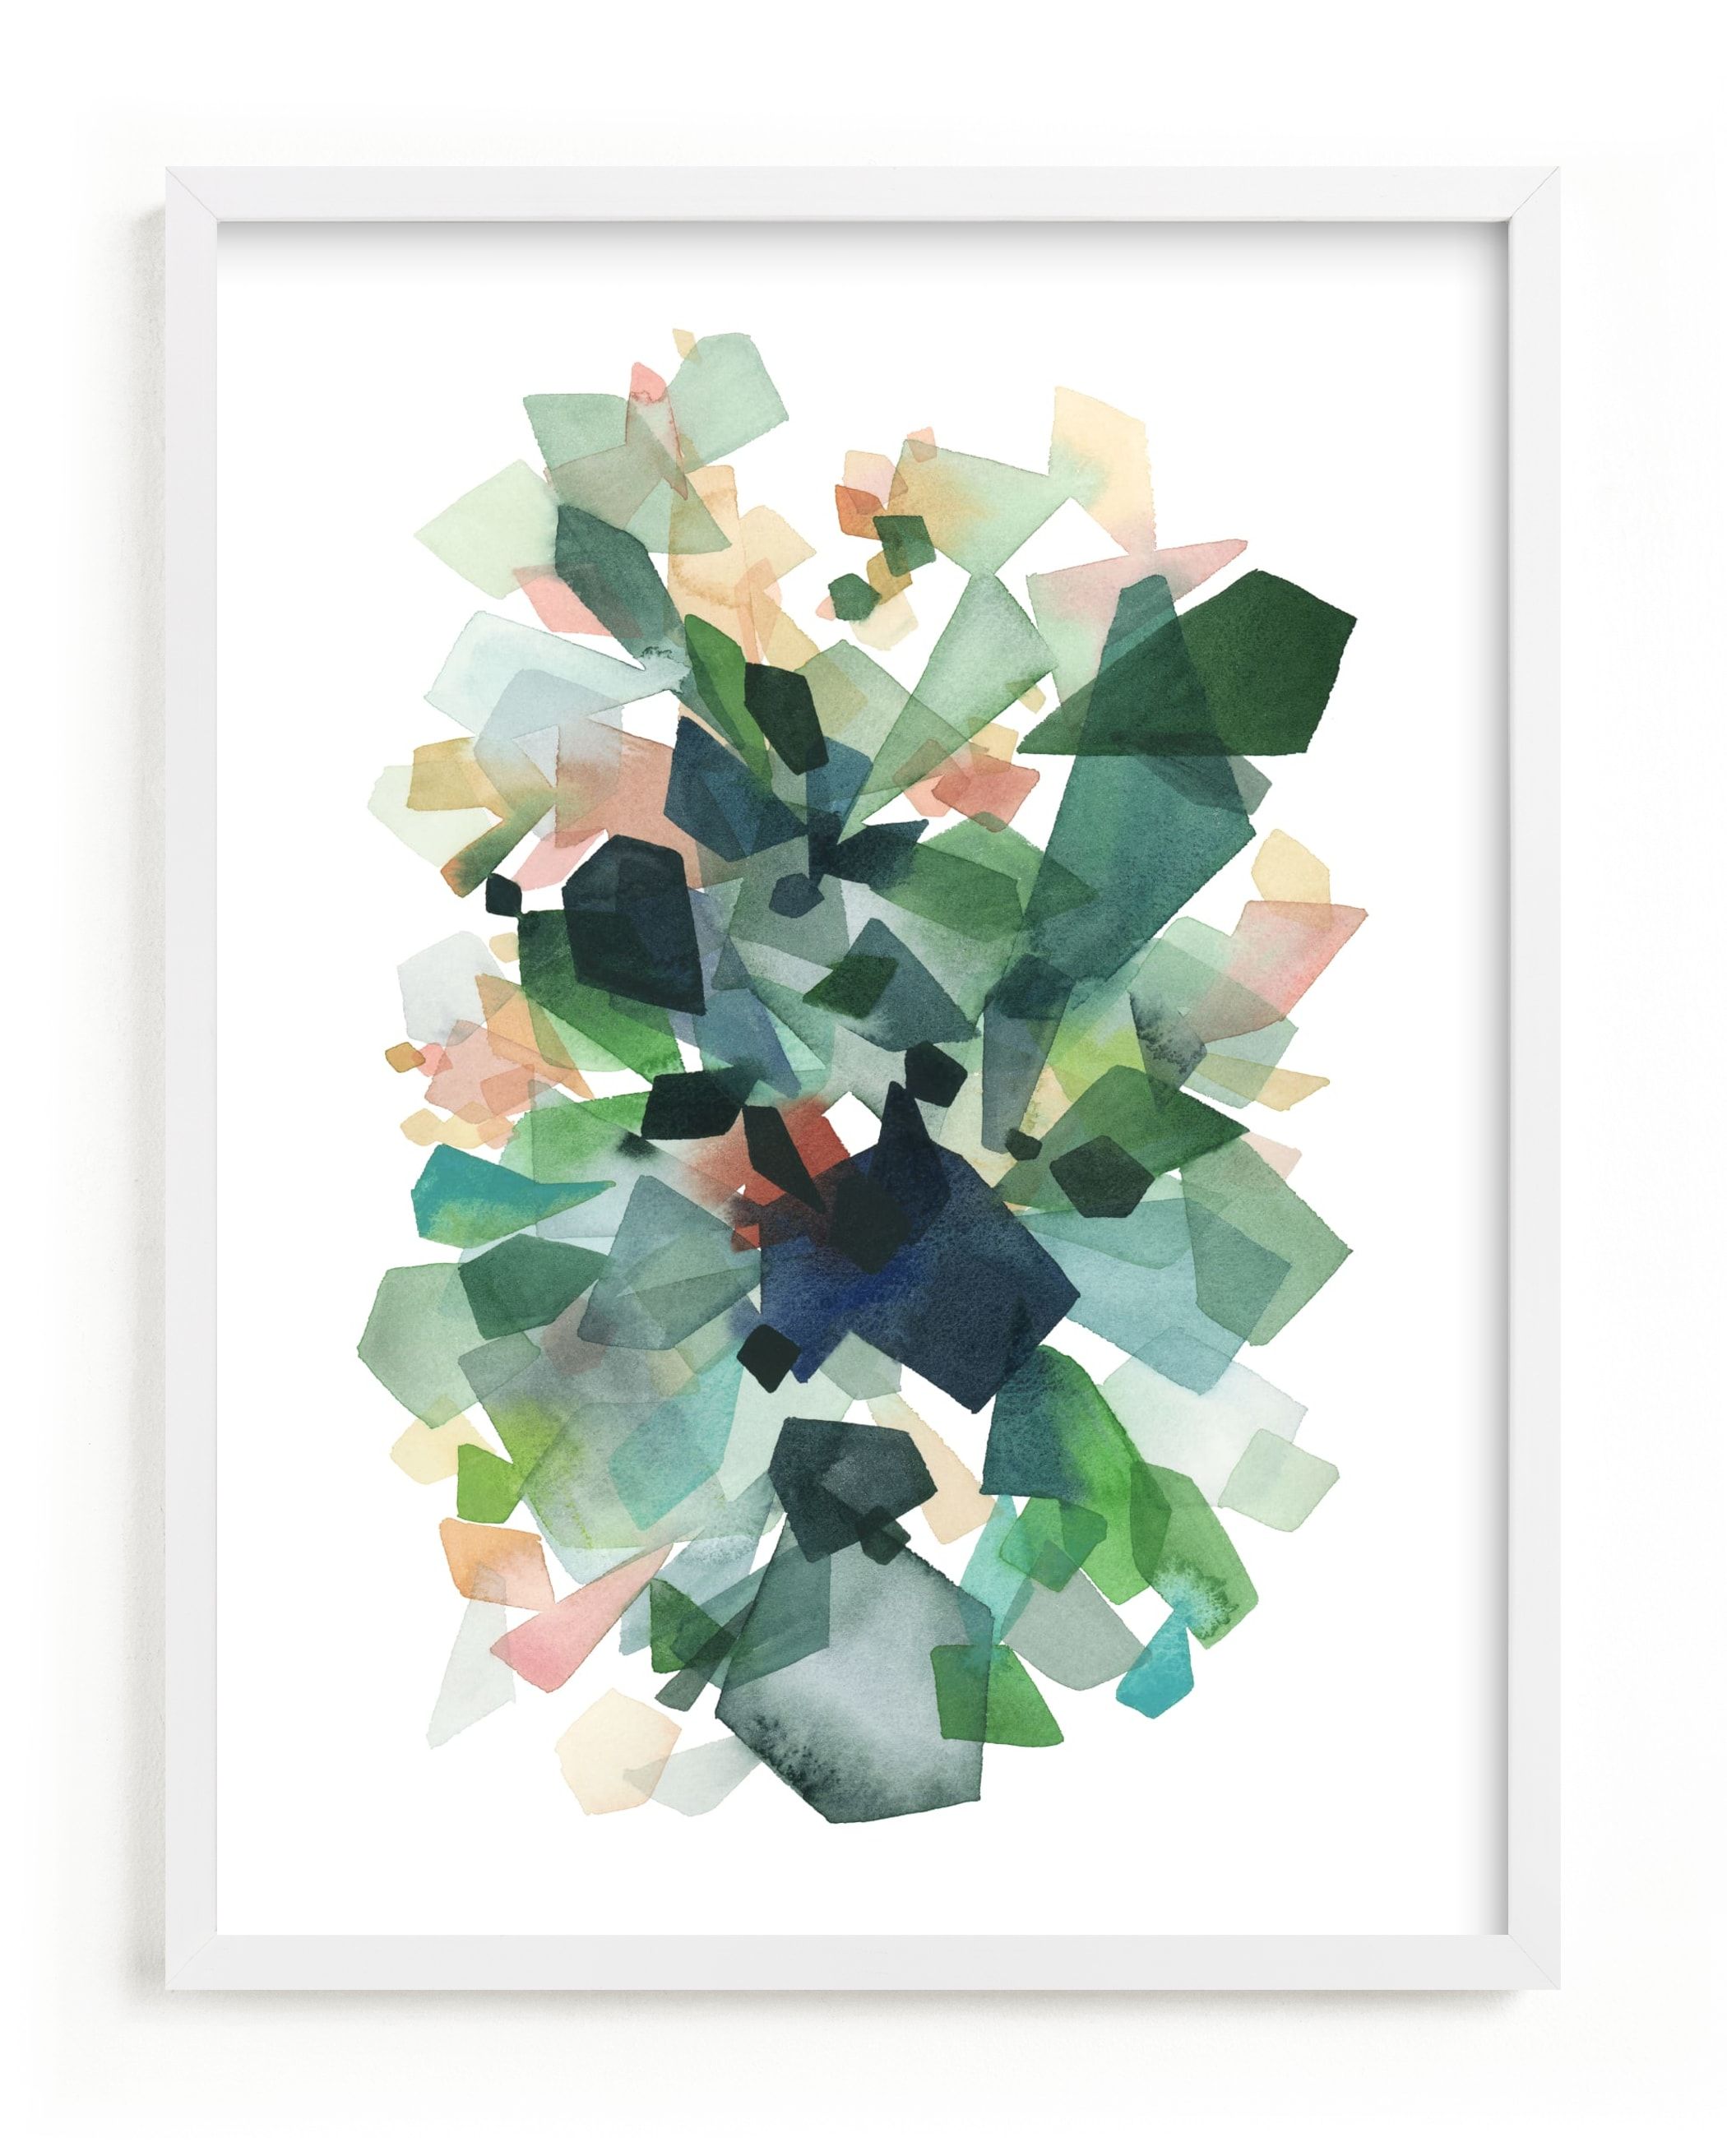 "Emerald Gems" - Painting Limited Edition Art Print by Yao Cheng Design. | Minted